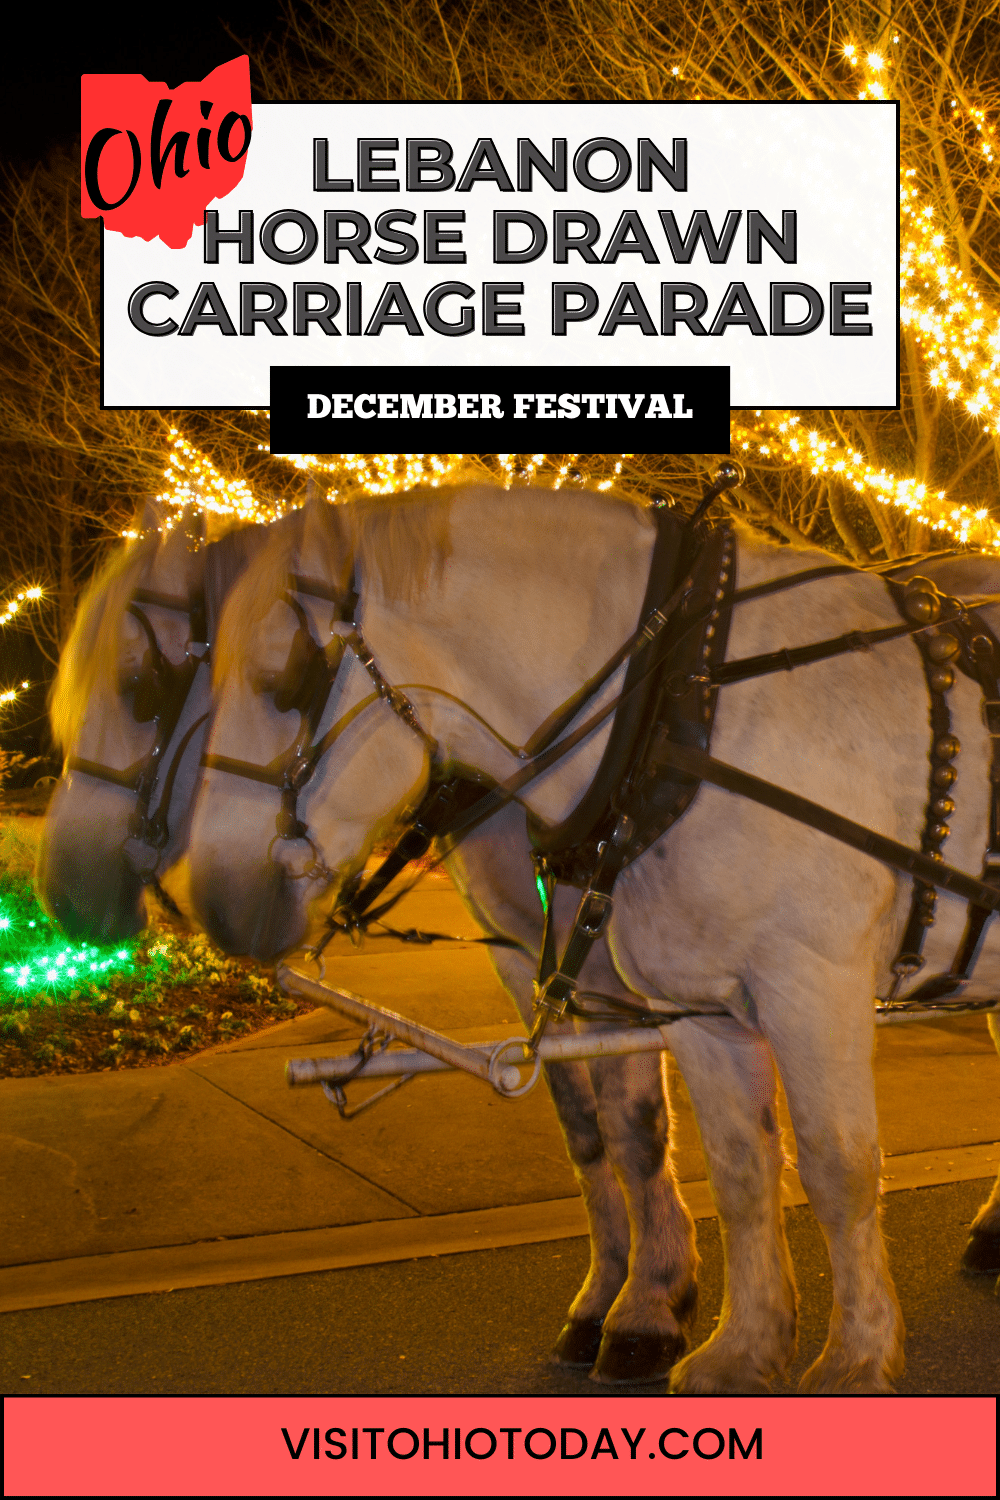 The Lebanon Horse Drawn Carriage Parade and Festival is a one-day event in downtown Lebanon in early December.